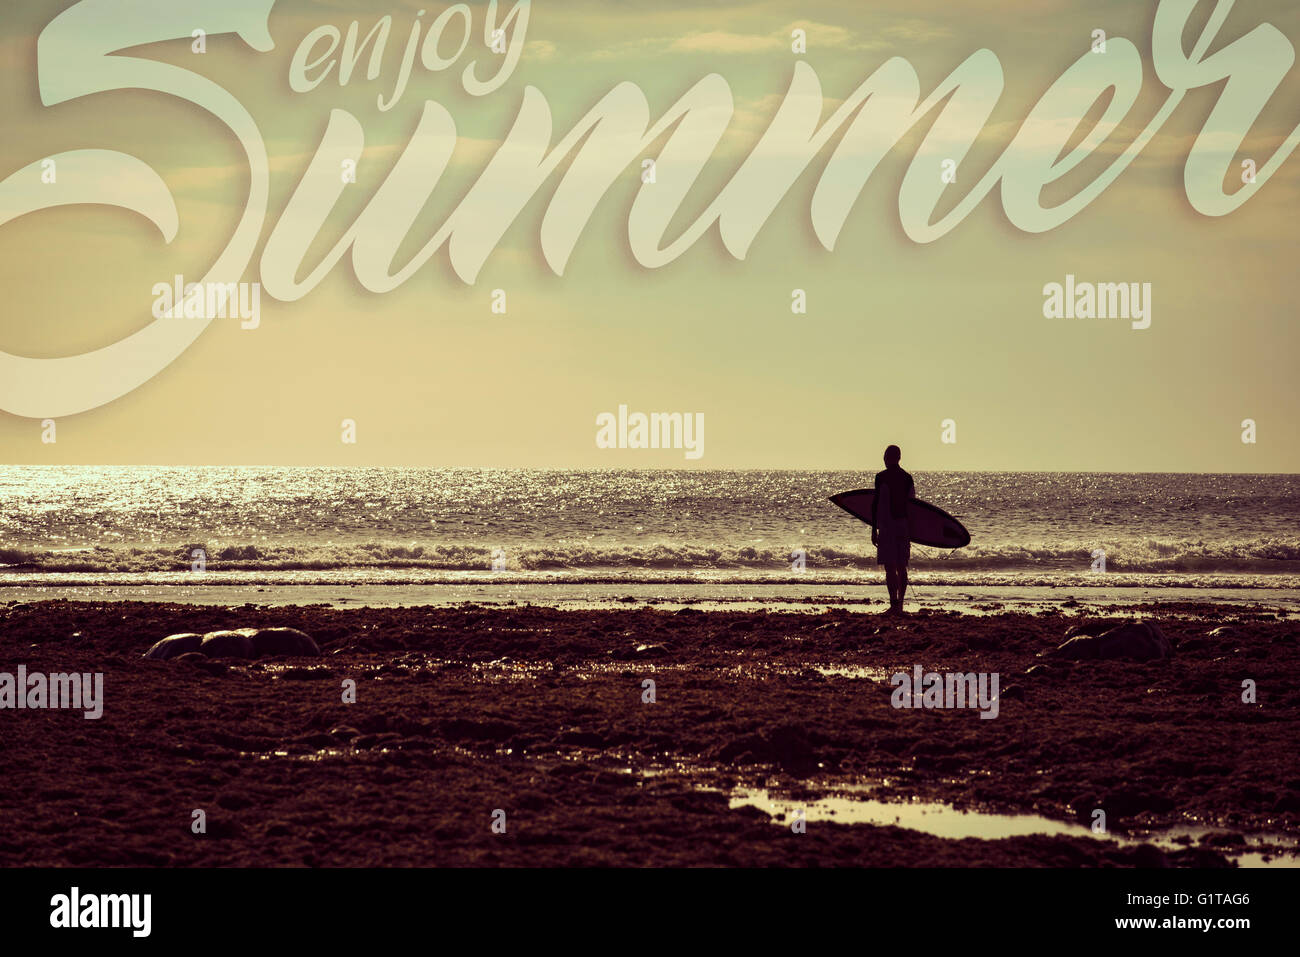 Surfer man silhouette in beach coast landscape with vintage filter. Enjoy summer vacation concept for surf greeting card or heal Stock Photo